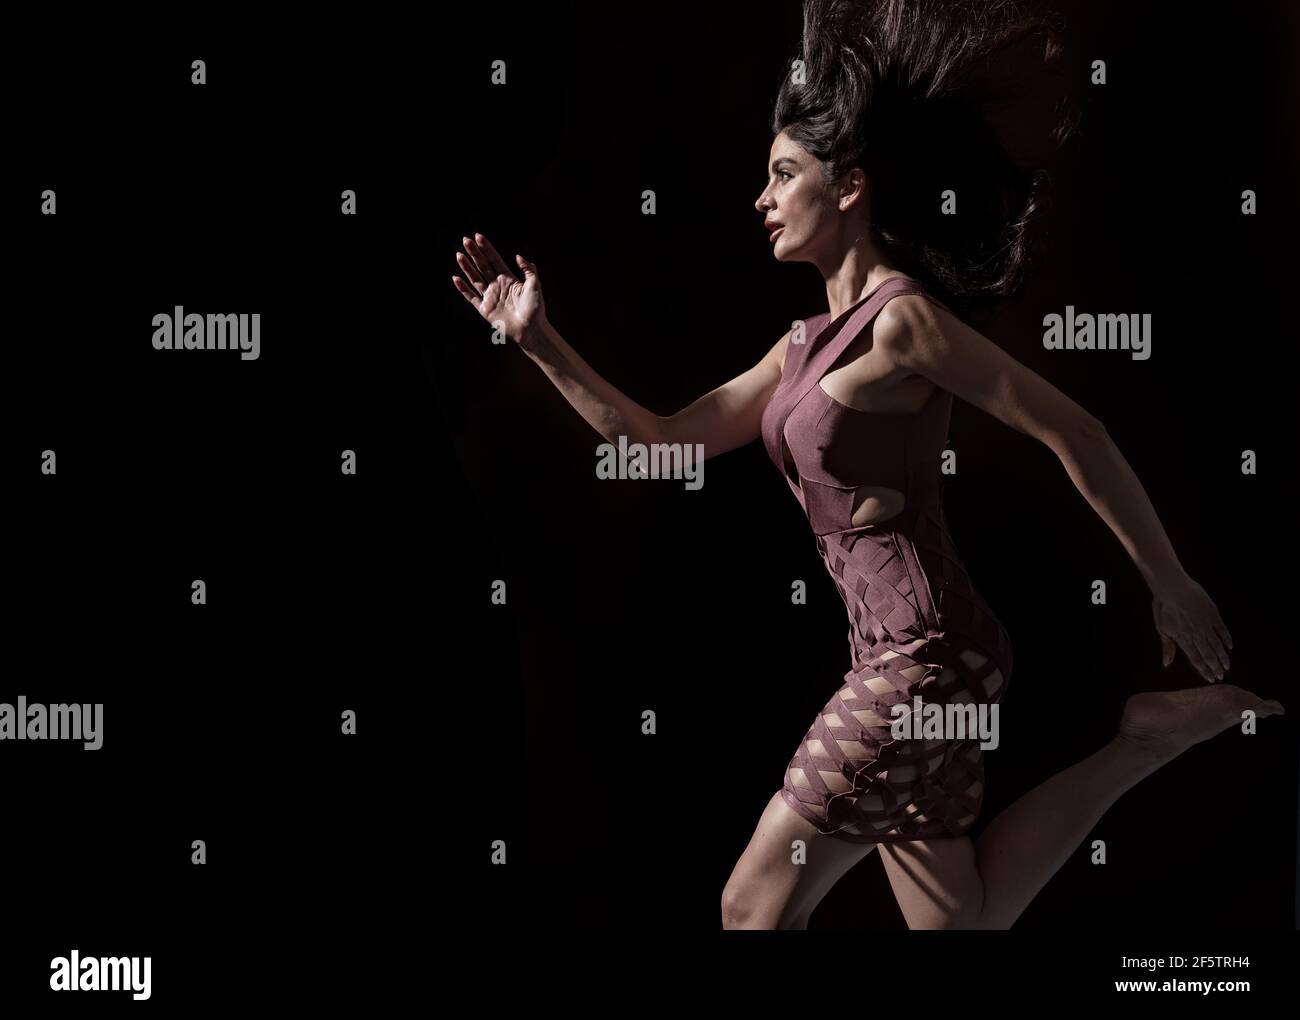 Conceptual photo of an elegant woman running in shade Stock Photo